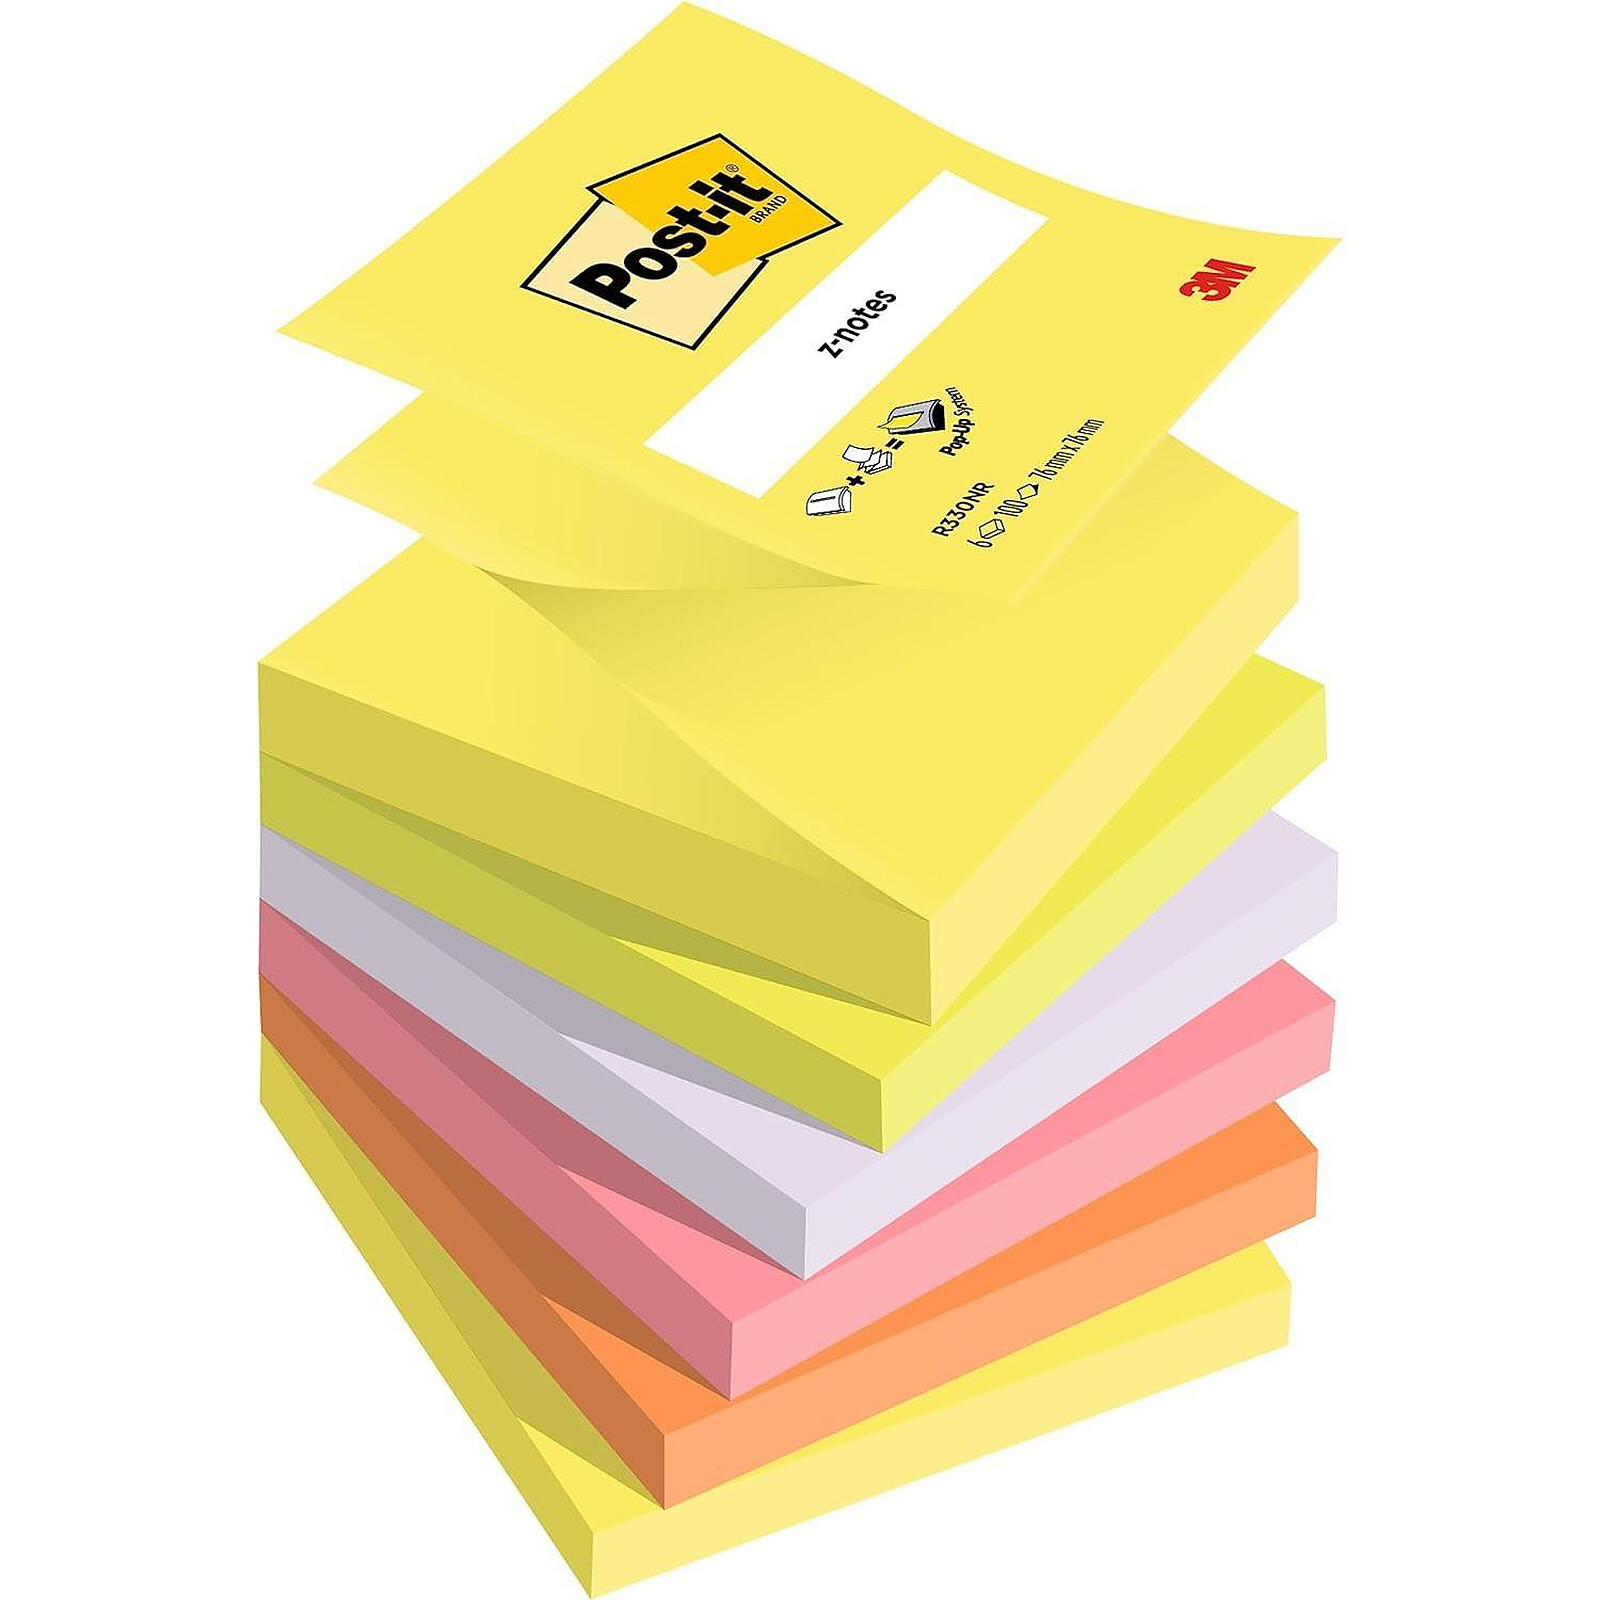 Post-it Index mini 100 marque-pages 12 x 44 mm assortis - - LDLC